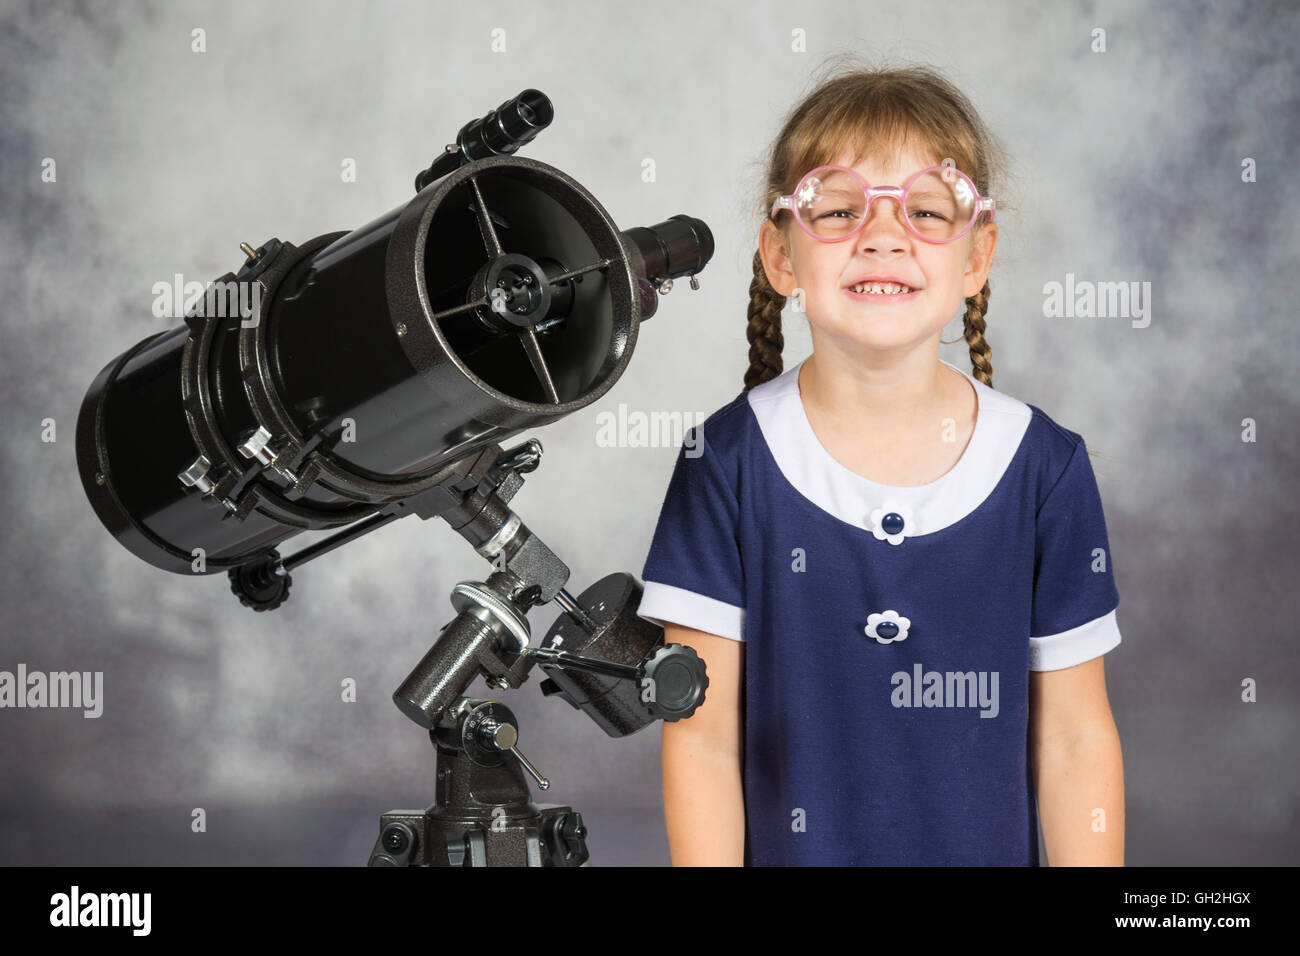 Girl bespectacled amateur astronomer funny smiling standing by telescope Stock Photo